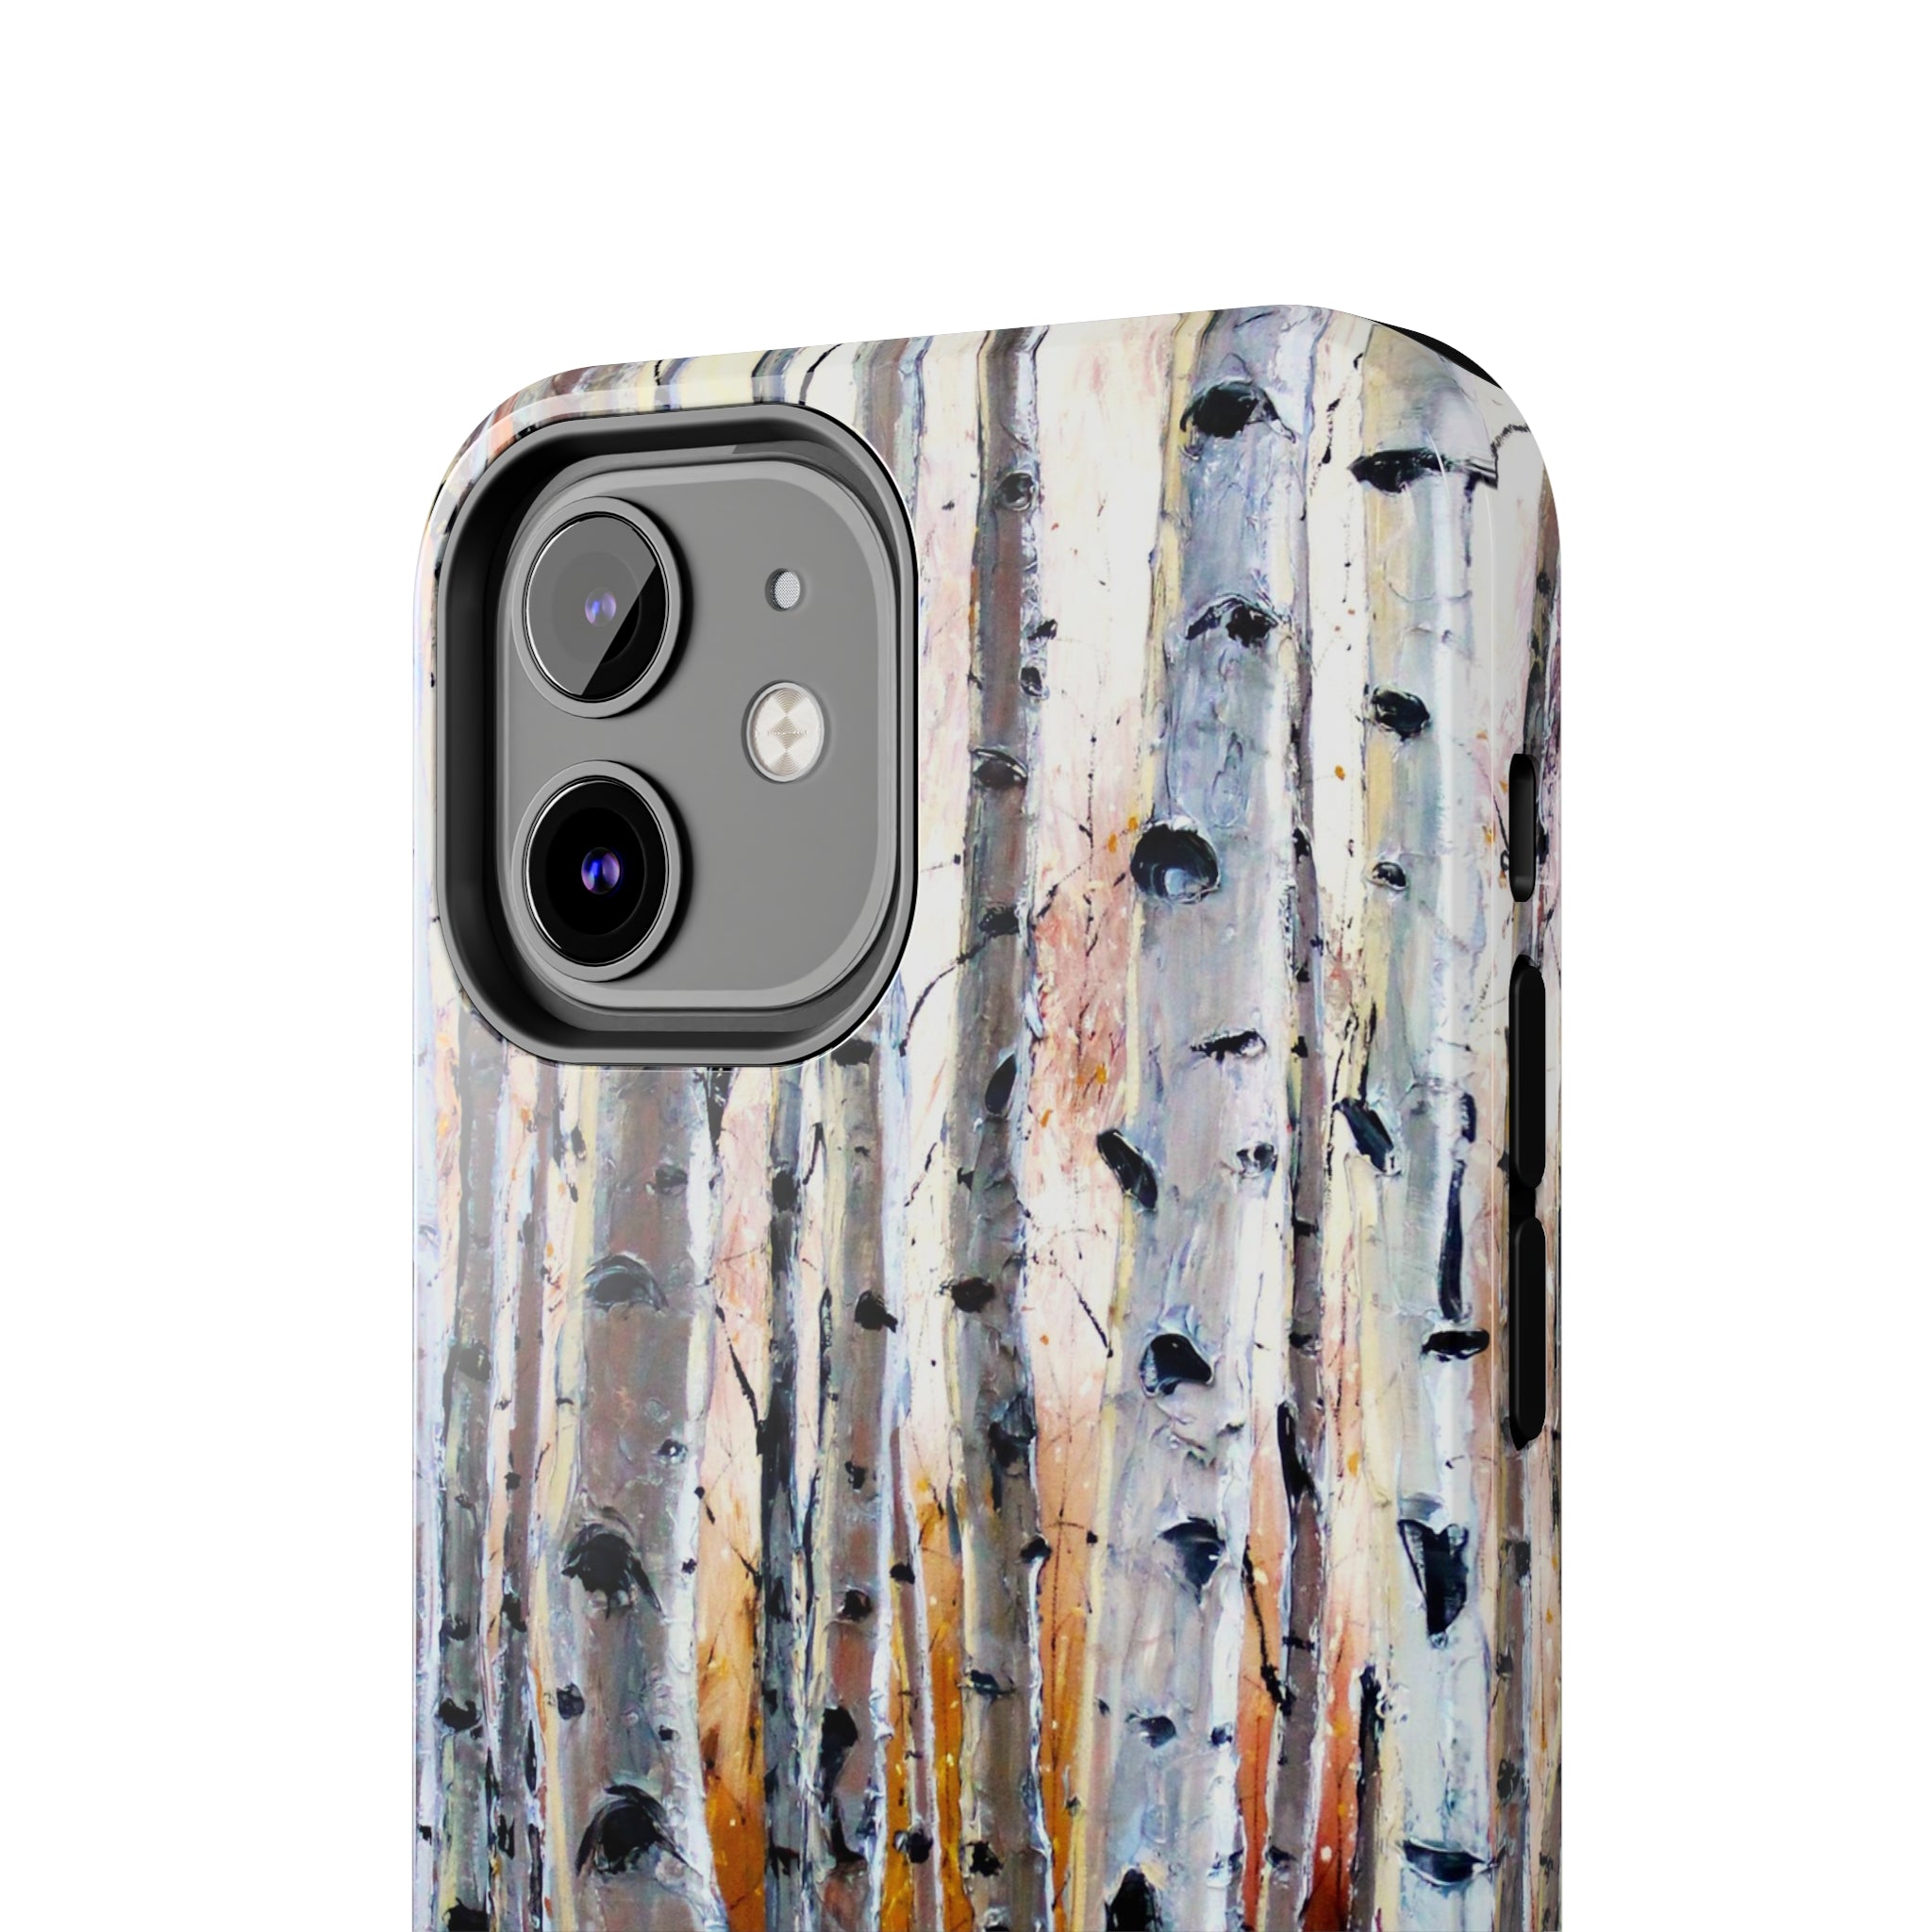 Forest Life - Premium Phone Cases, FREE SHIPPING